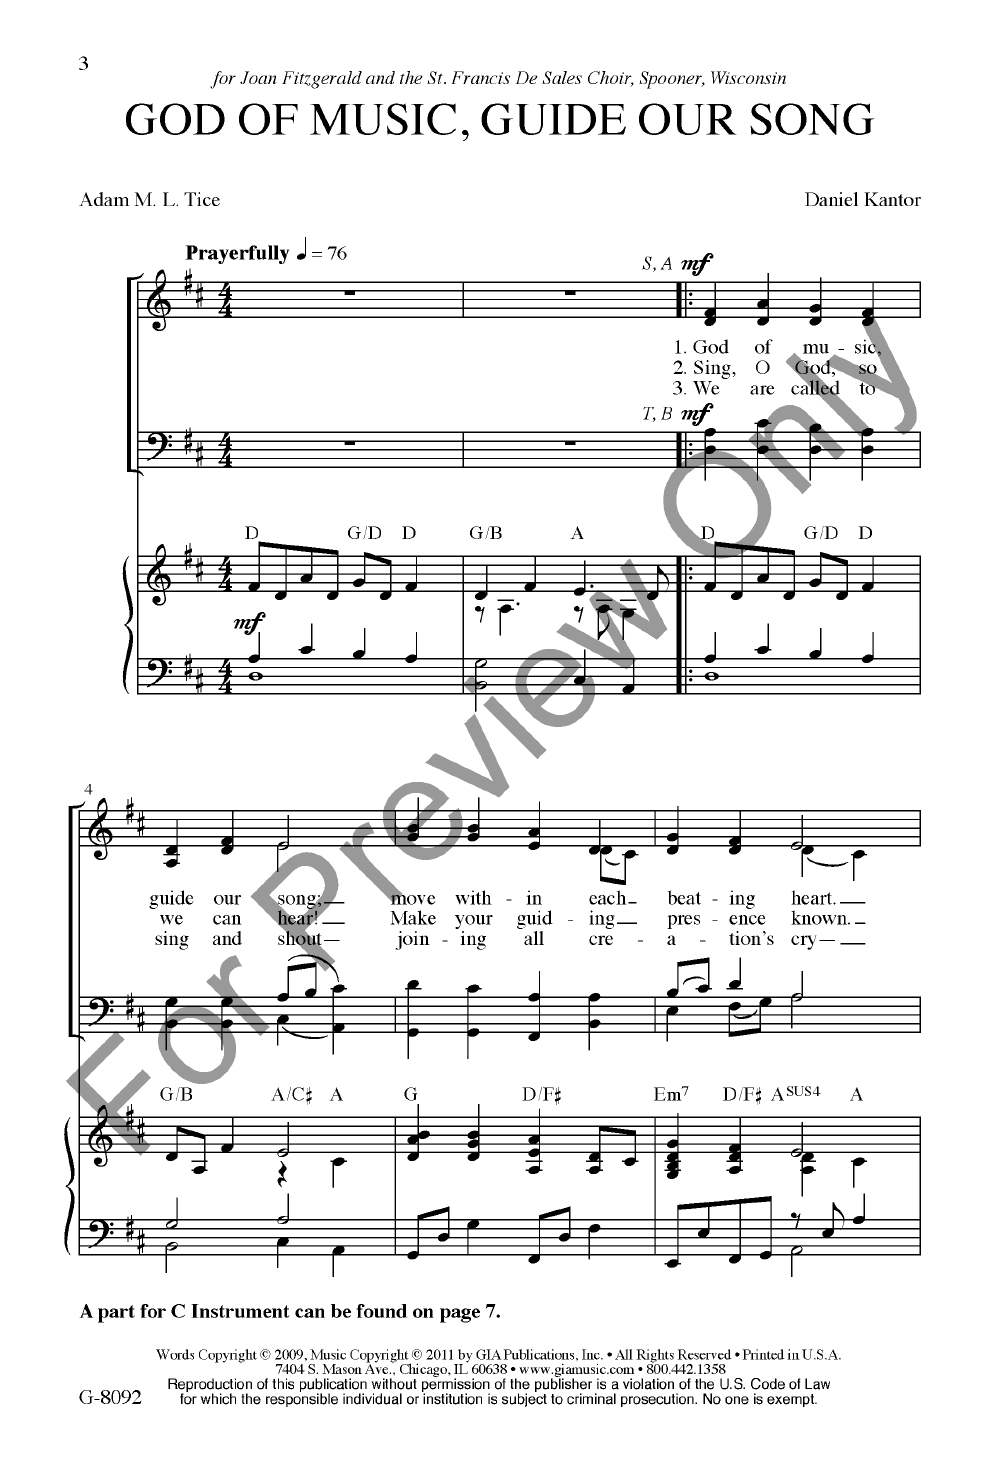 God of Music, Guide Our Song (SATB ) by Dan | J.W. Pepper Sheet Music